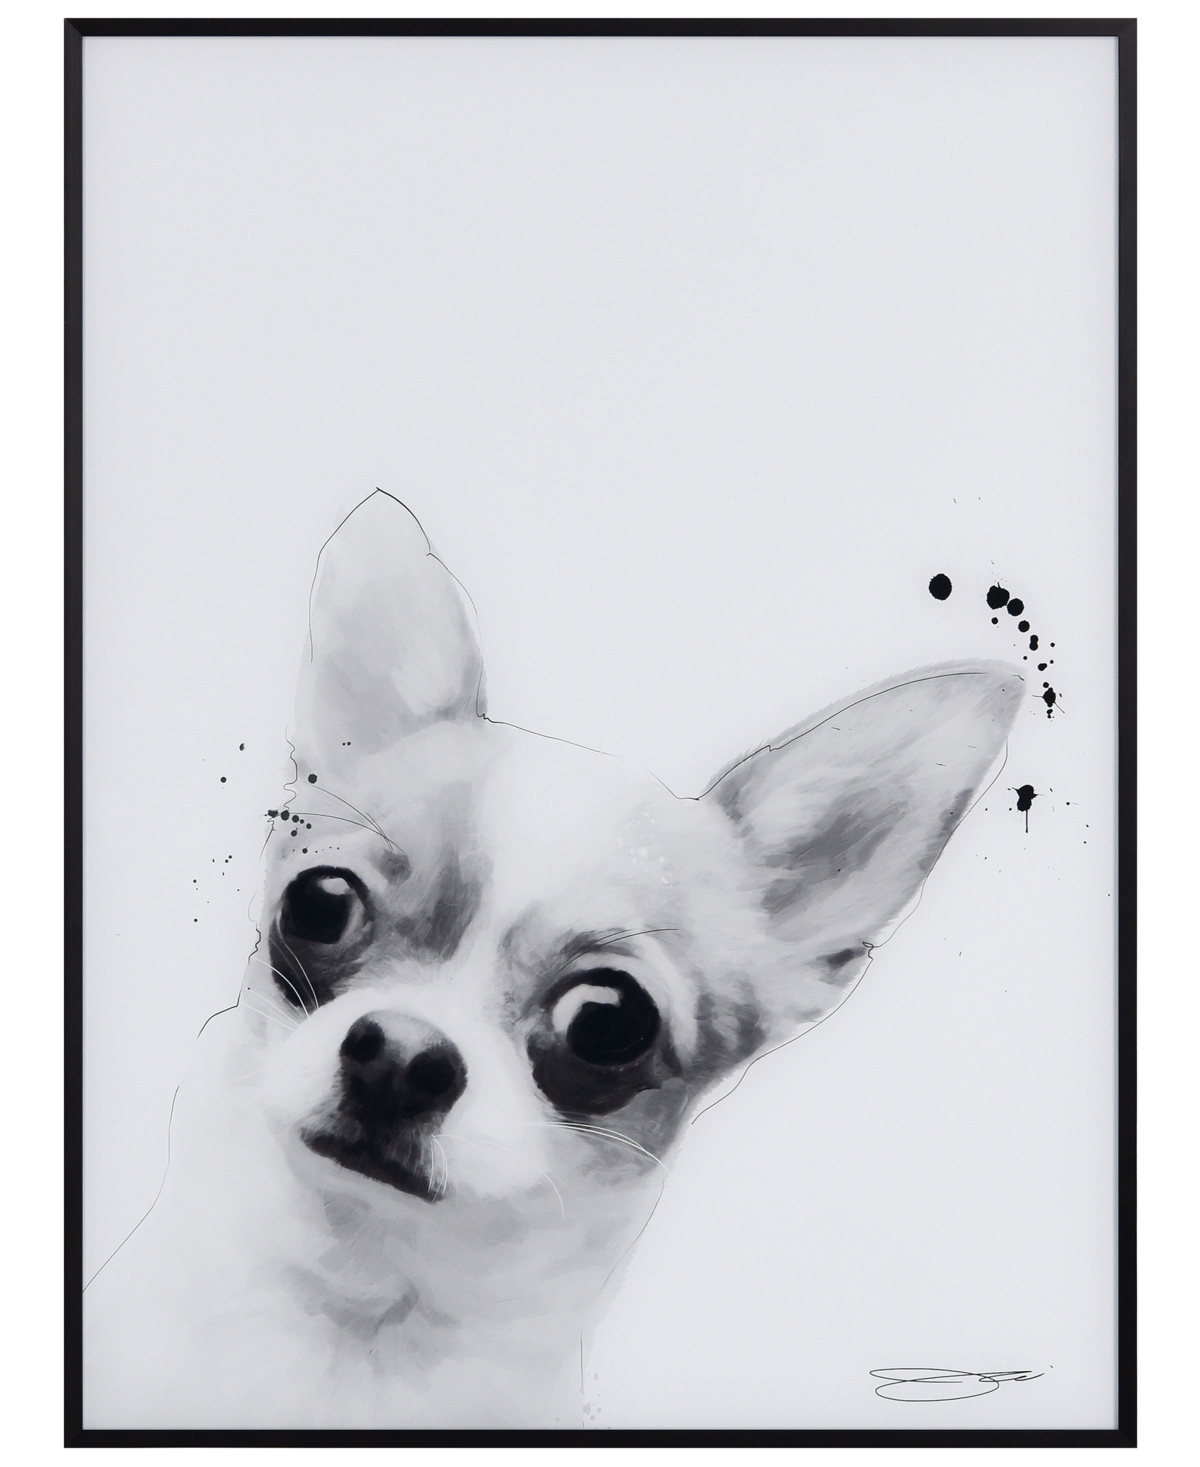 Empire Art Direct "chihuahua" Pet Paintings On Printed Glass Encased With A Black Anodized Frame, 24" X 18" X 1" In Black And White